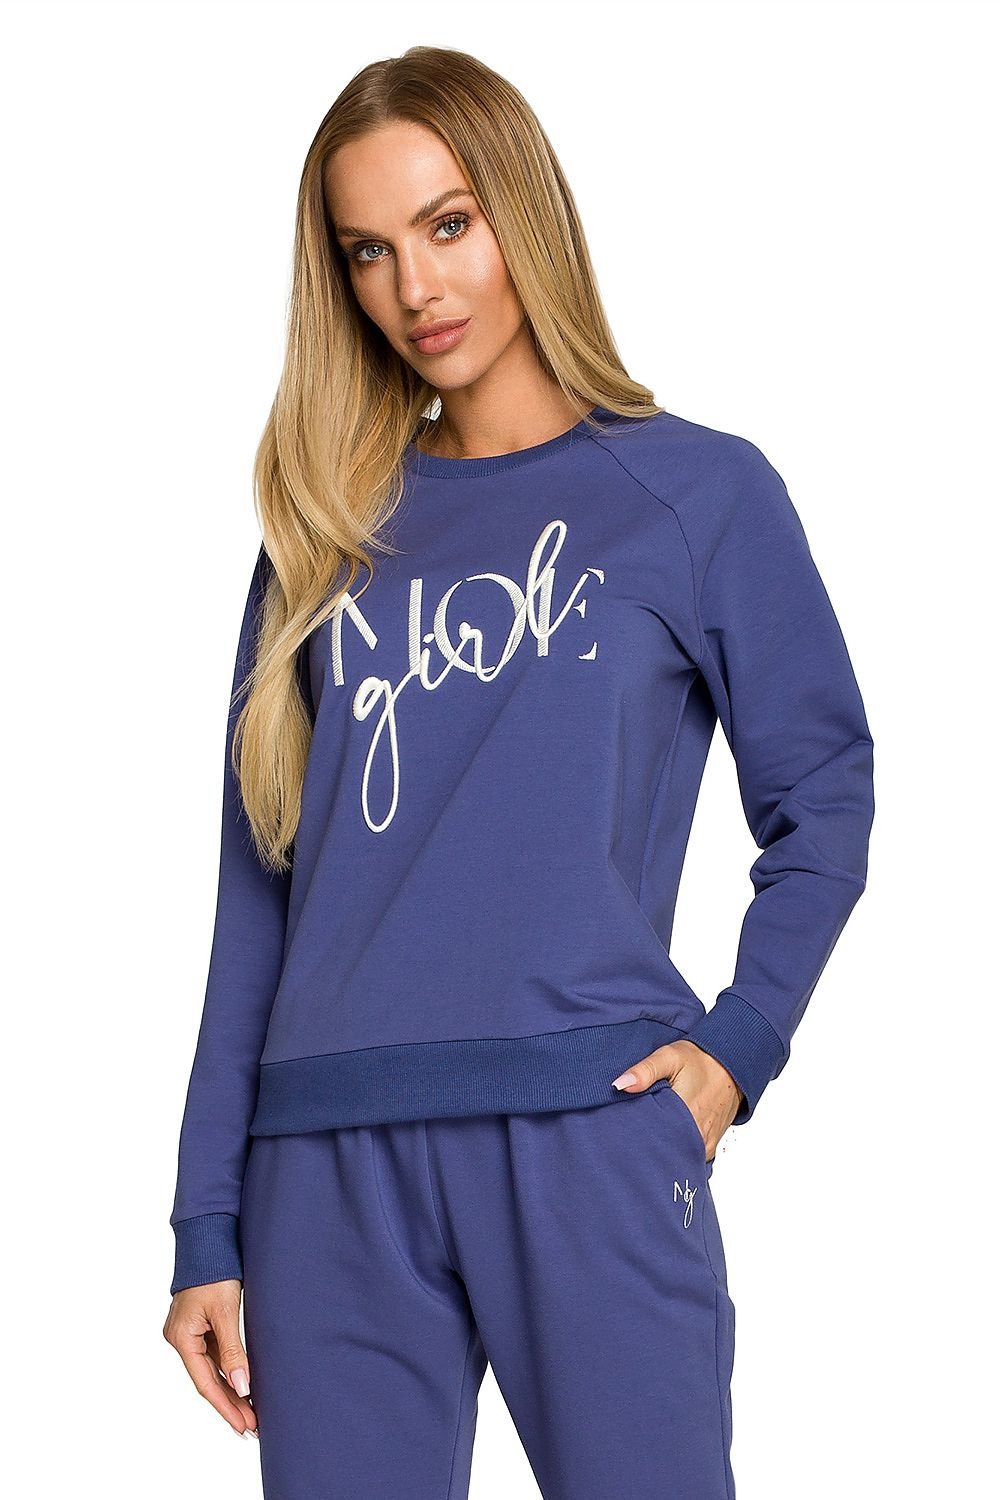 Moe Girl Dynamic Duo Embroidered Top